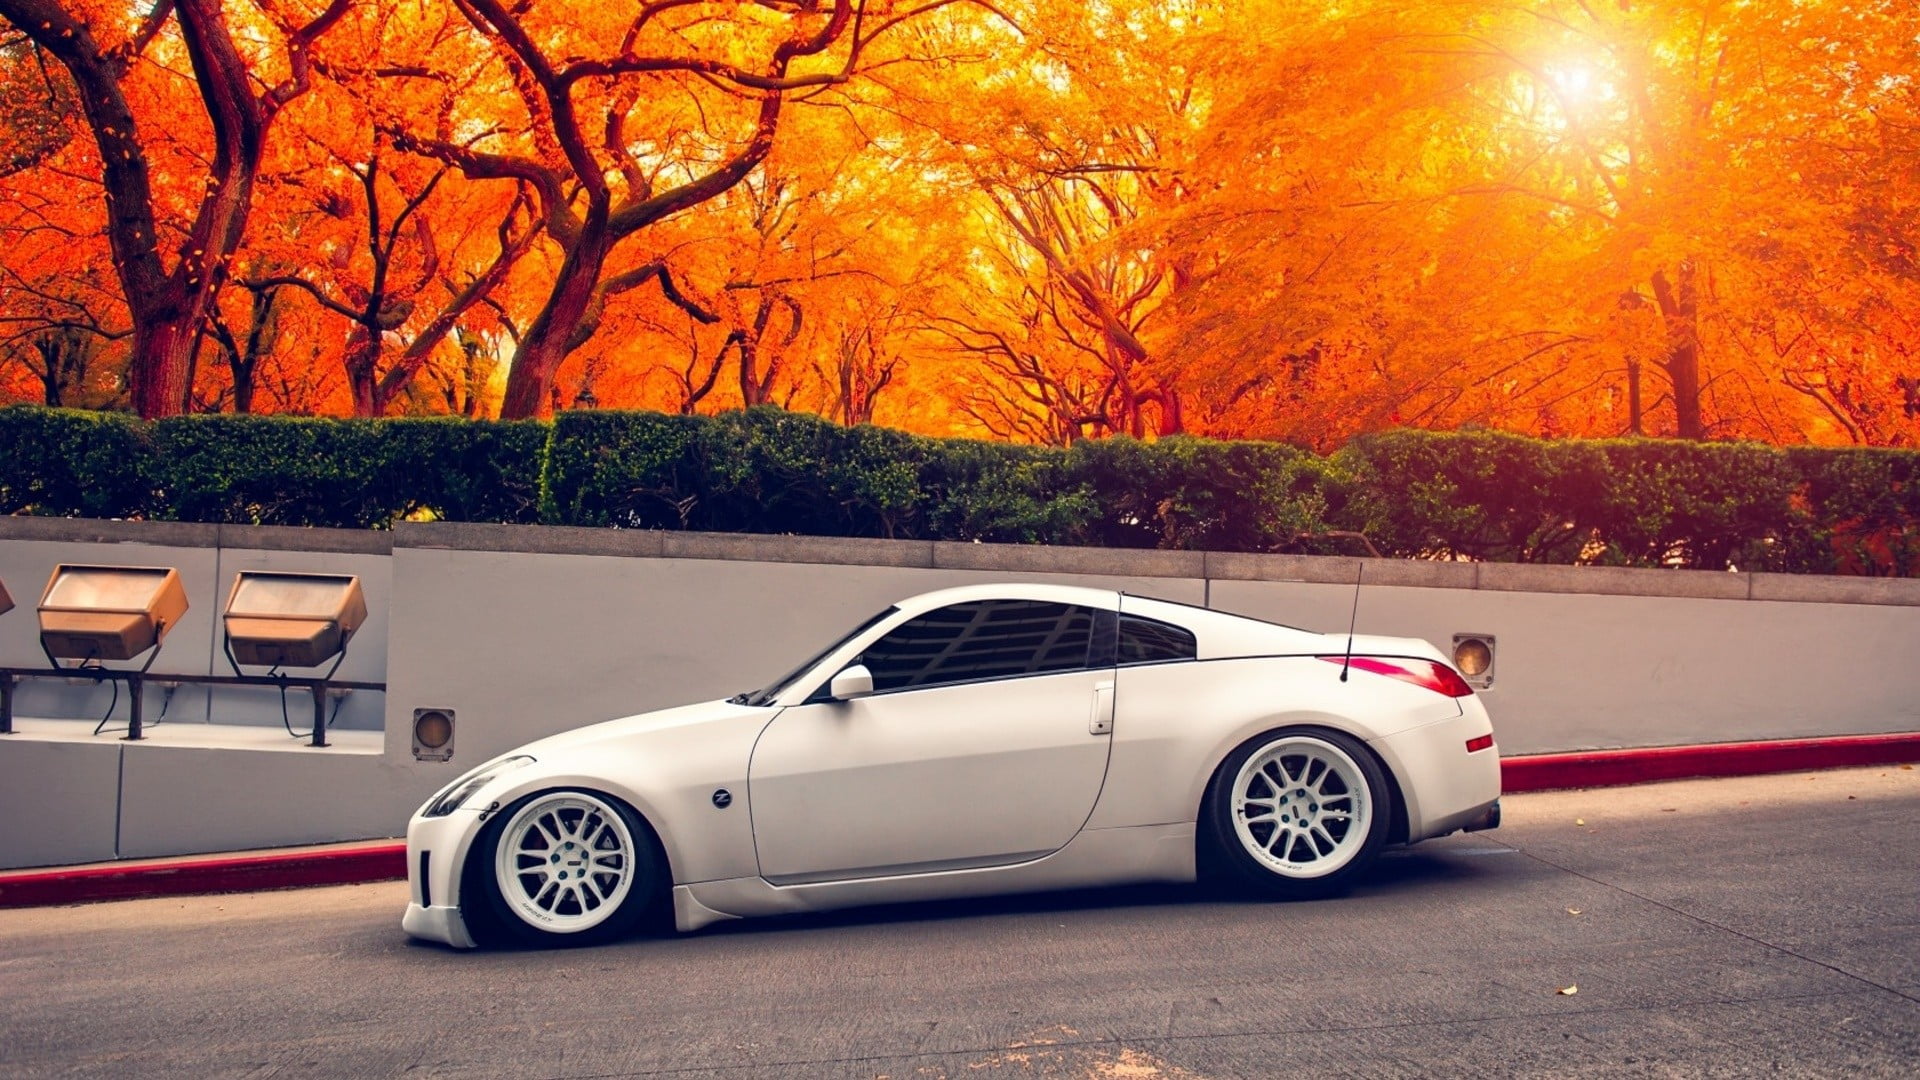 White Nissan 350z Coupe Car Nissan Hd Wallpaper Wallpaper Flare Images, Photos, Reviews